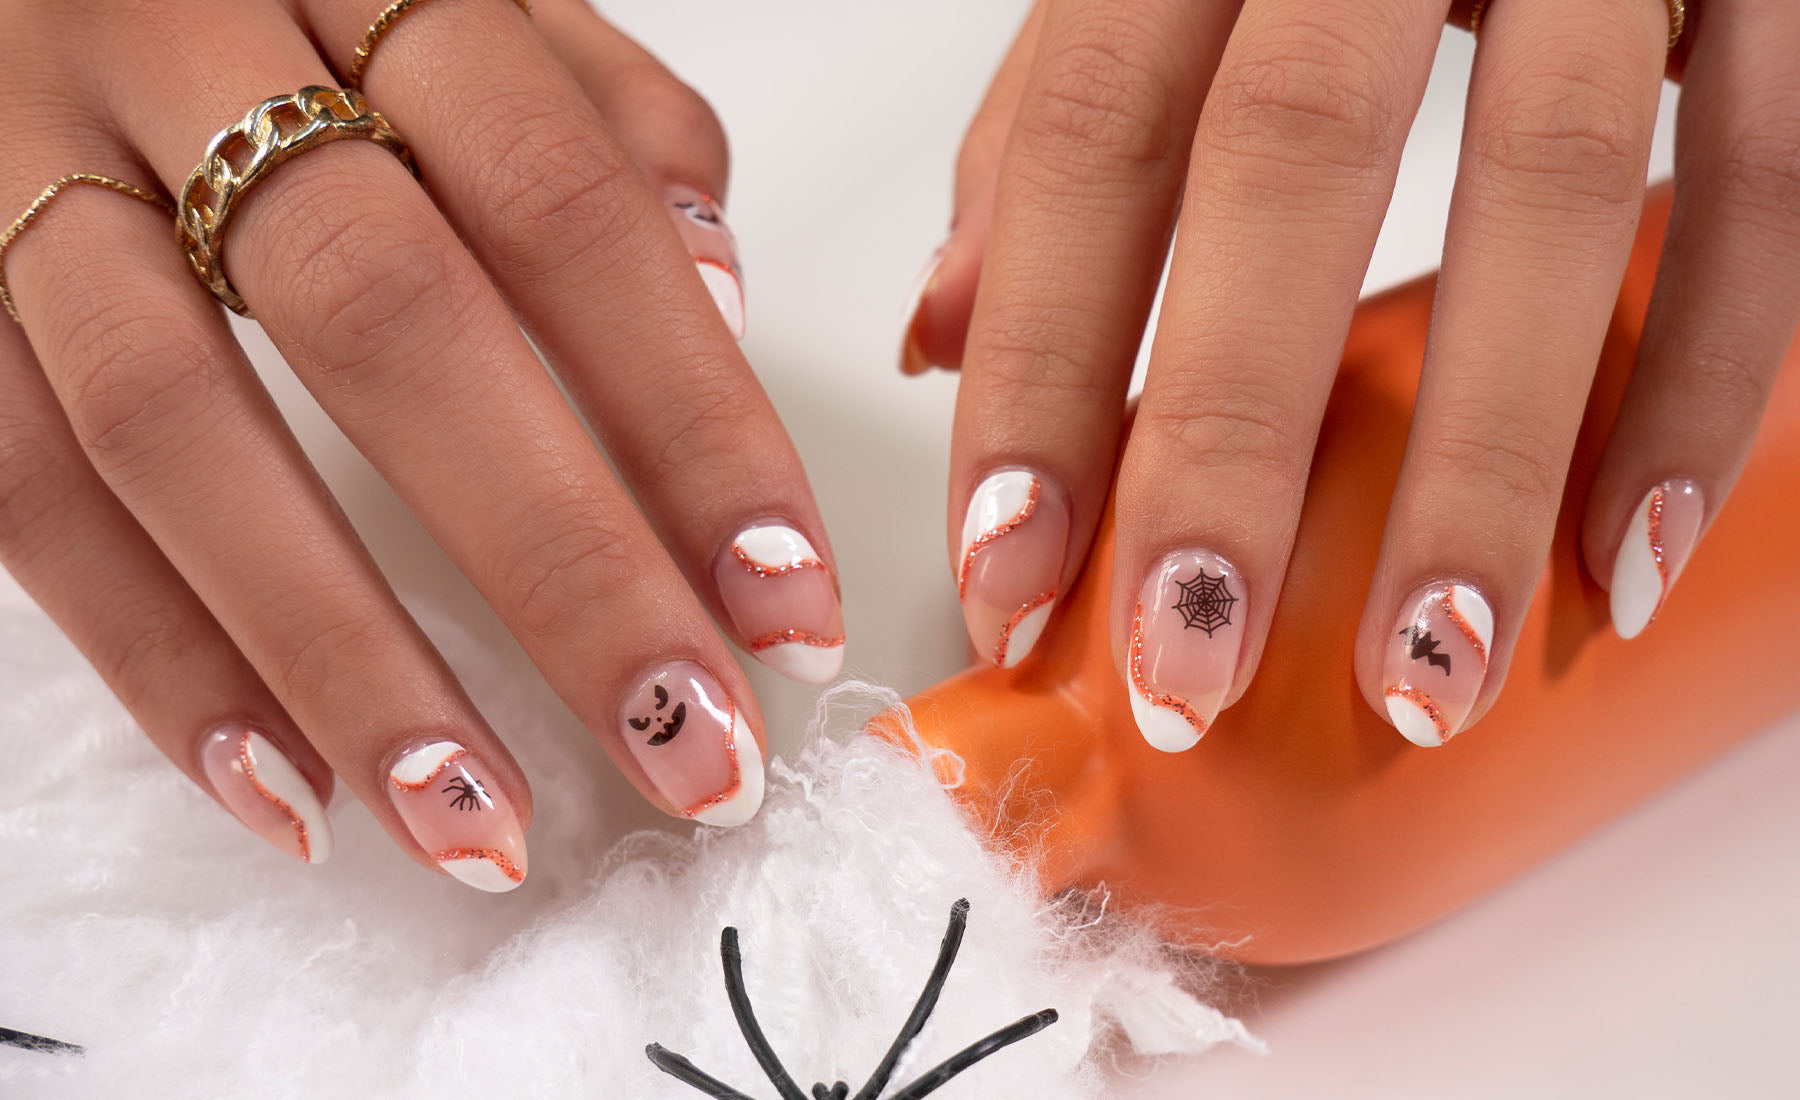 Gelous Halloween Swirls and Stickers gel nail art - photographed in Australia on model